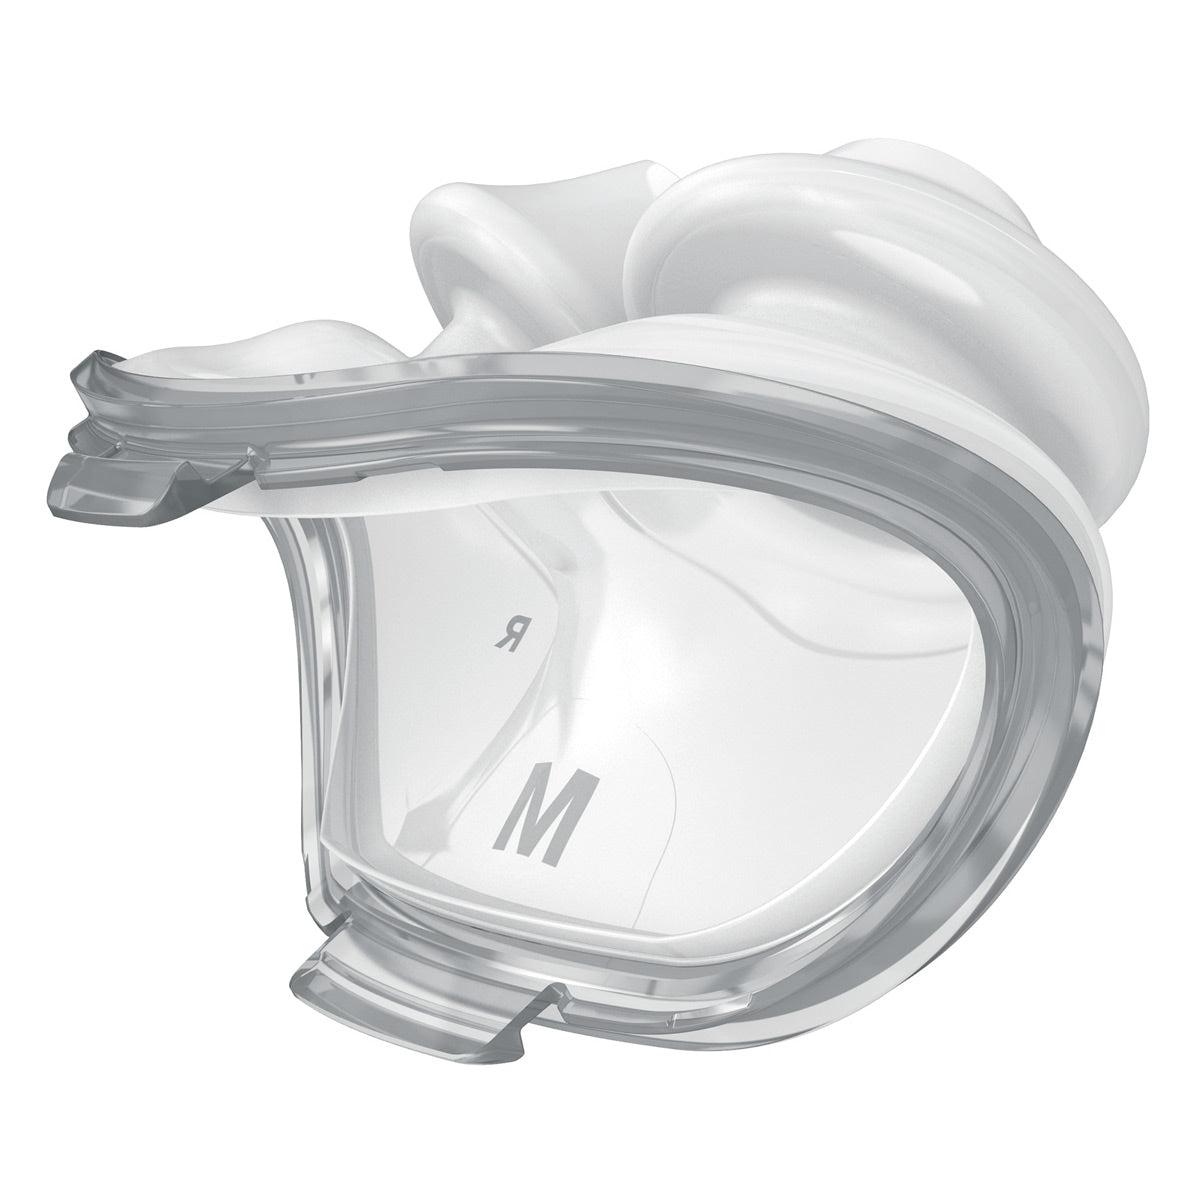 Nasal Pillows for AirFit P10 & AirFit P10 For Her CPAP/BiLevel Masks